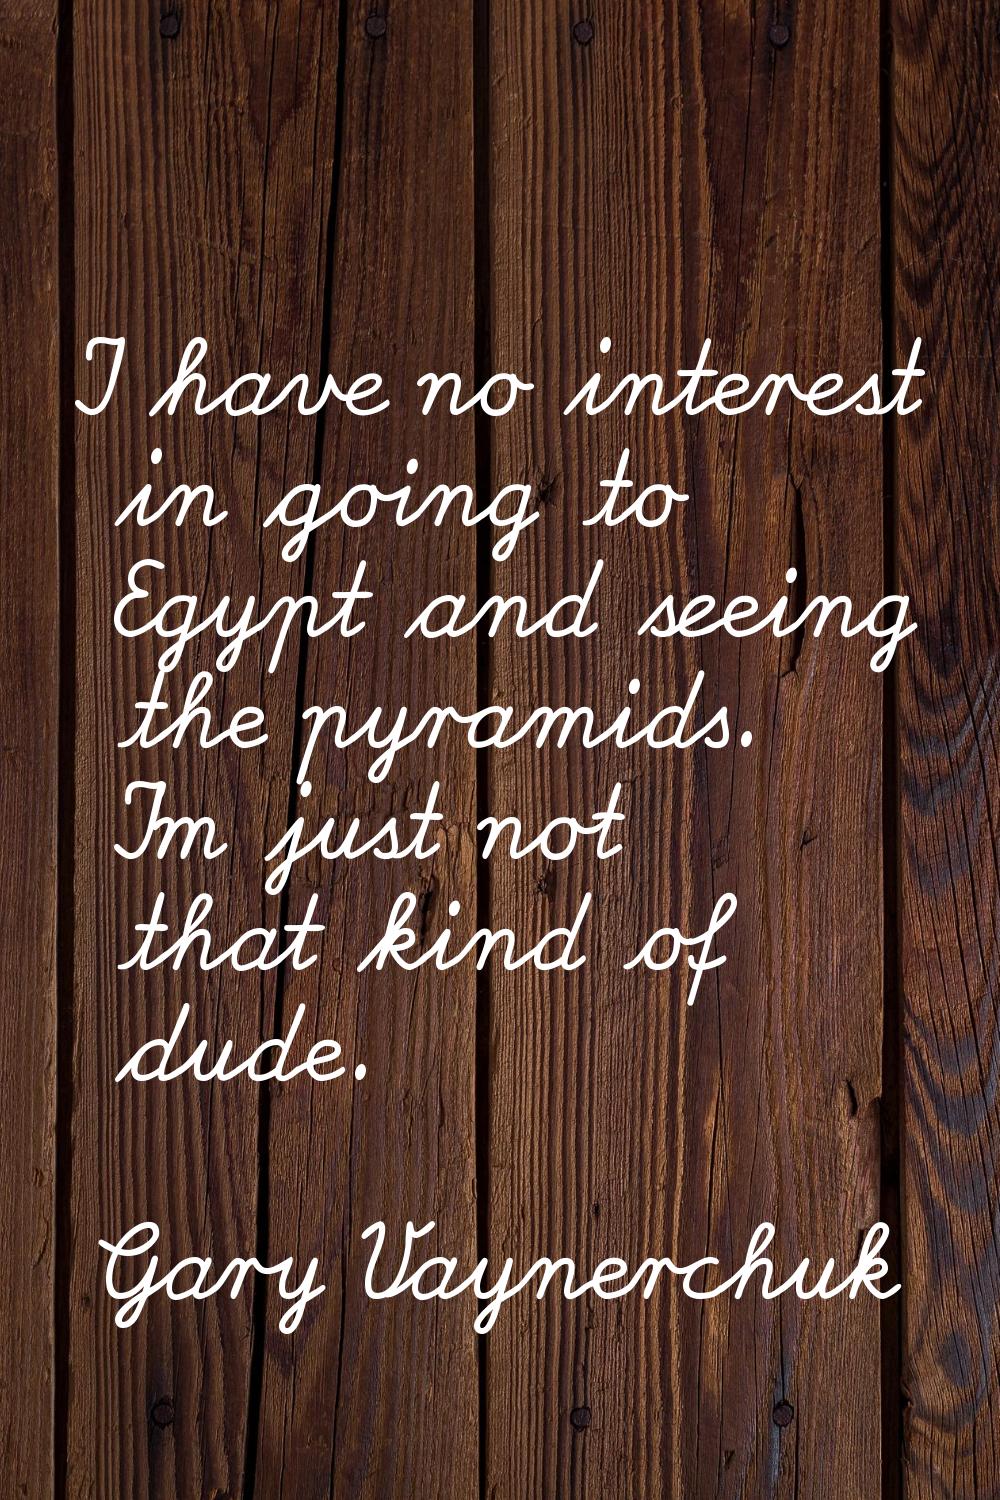 I have no interest in going to Egypt and seeing the pyramids. I'm just not that kind of dude.